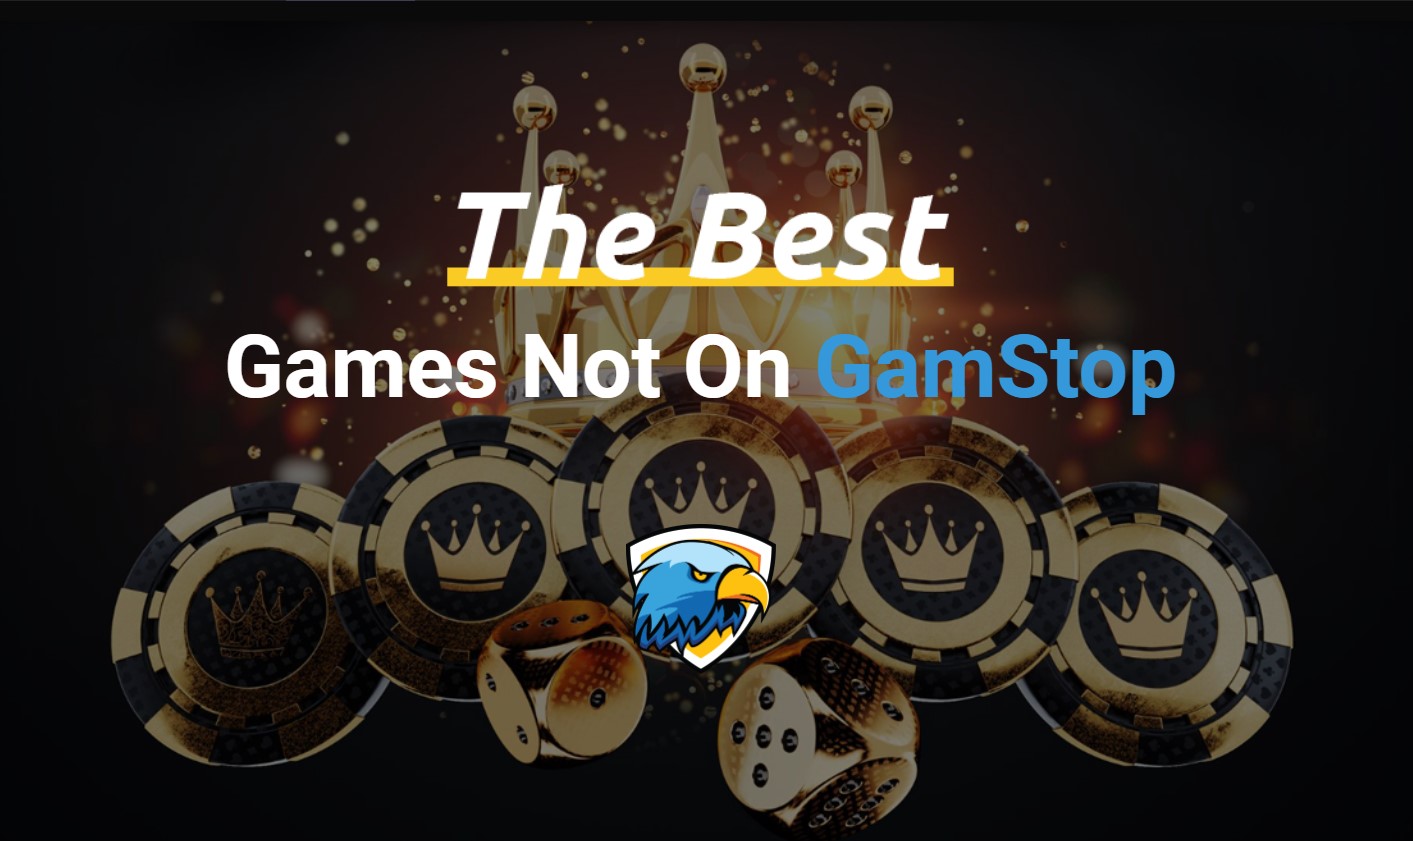 Games Not On Gamstop